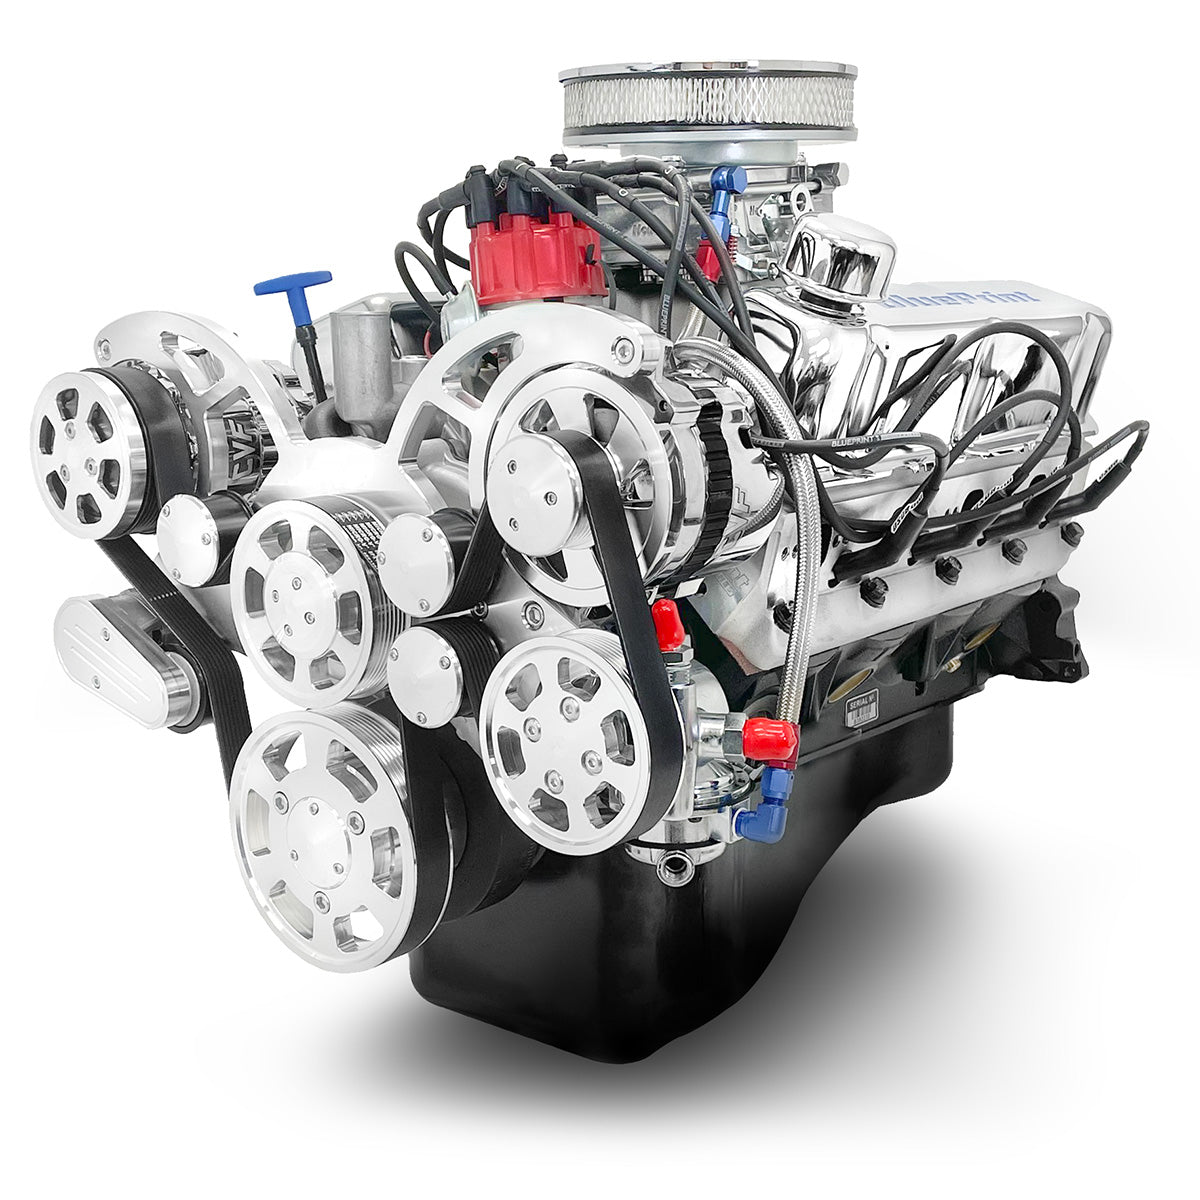 Ford SB Compatible 302 c.i. Engine - 361 HP - Deluxe Dressed with Polished  Pulley Kit - Fuel Injected